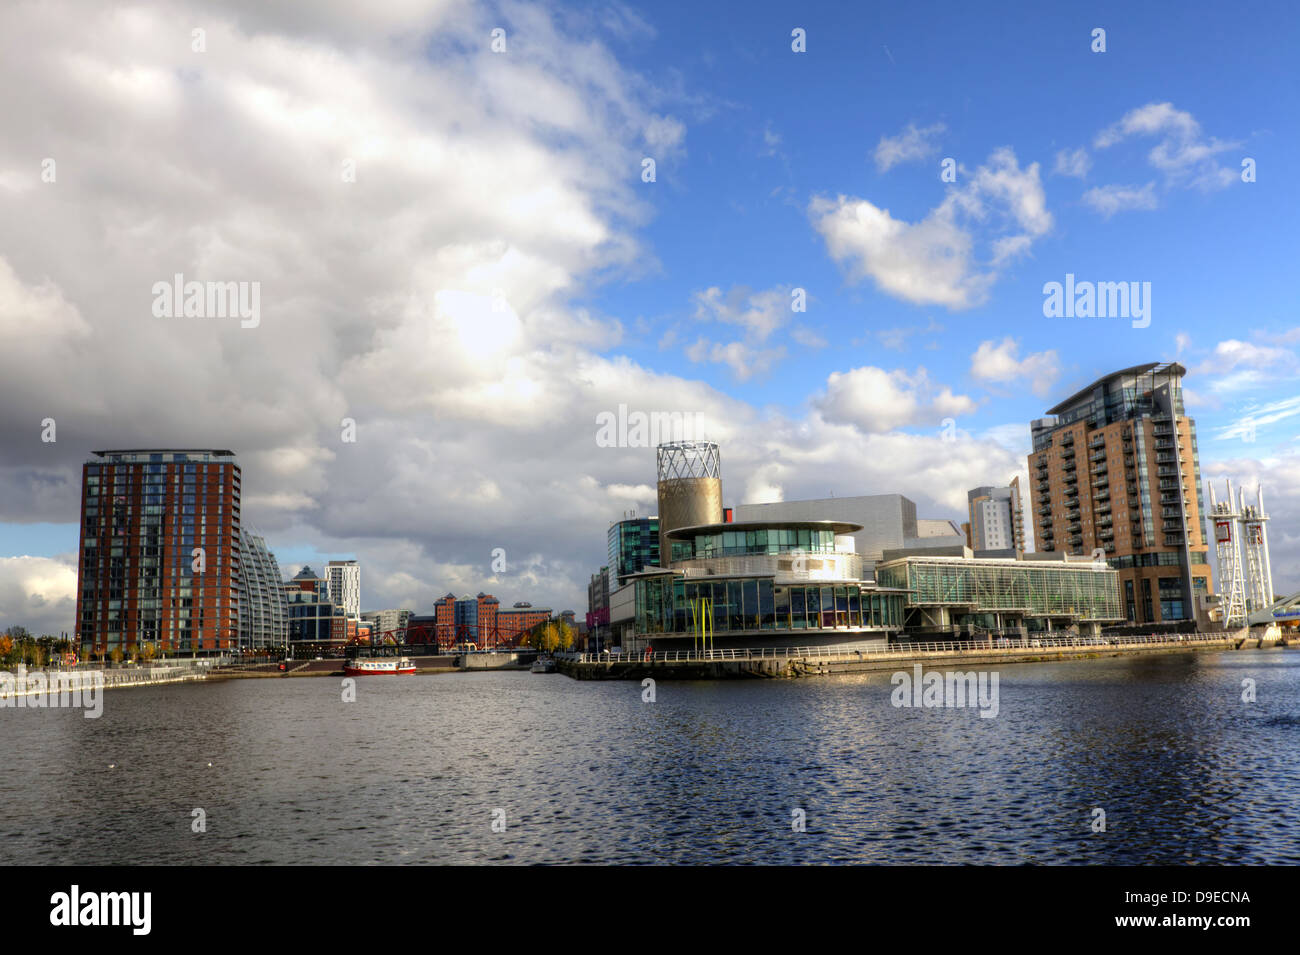 Cityscape with The Lawrys complex designed by Michael Wilford at Salford Quays in Manchester England. Stock Photo